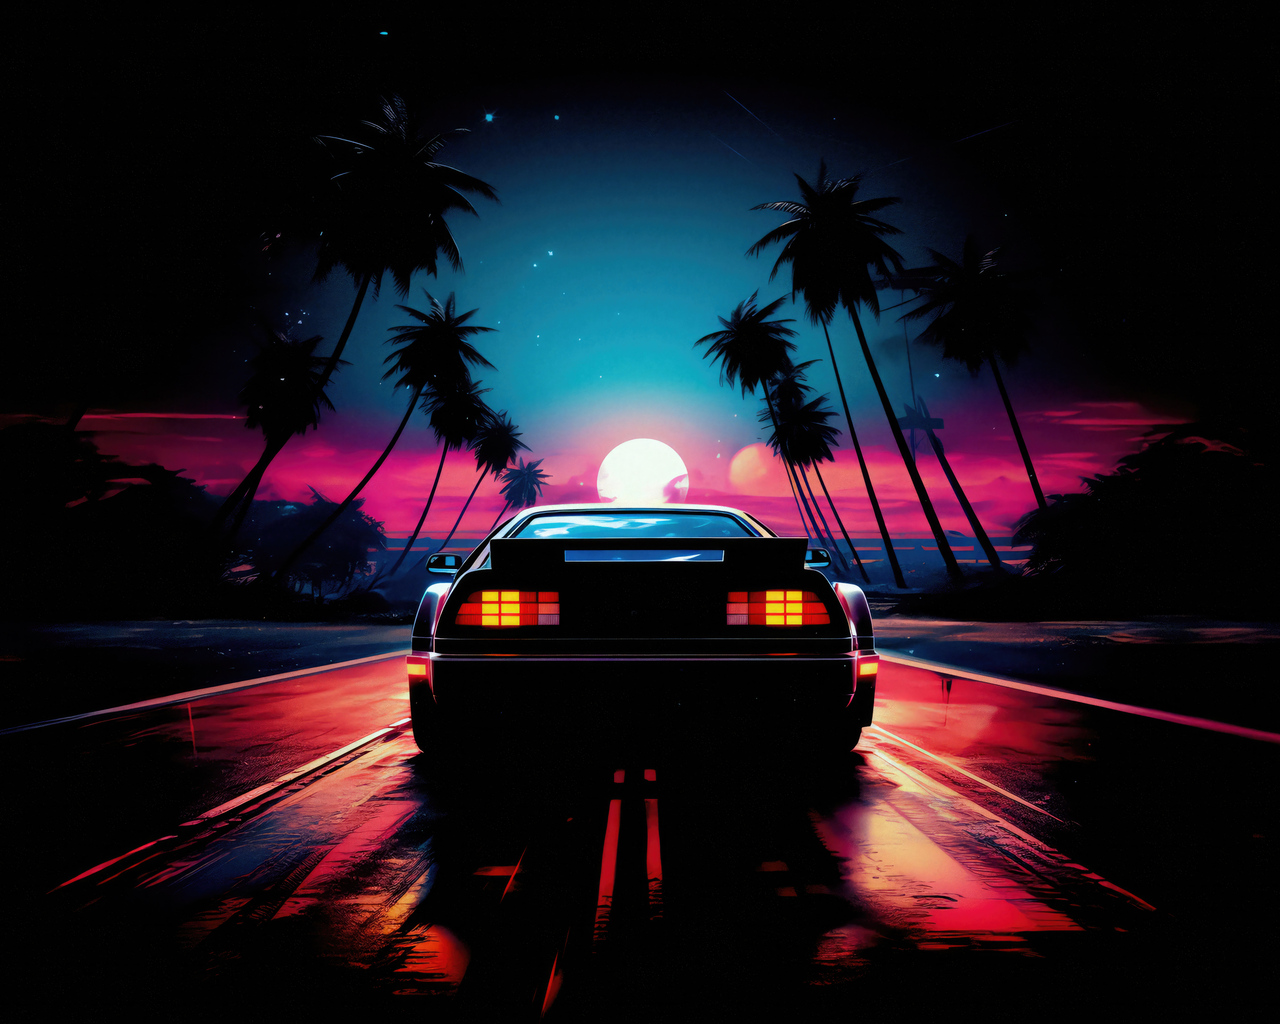 Delorean And Outrun Sunset Wallpaper In 1280x1024 Resolution